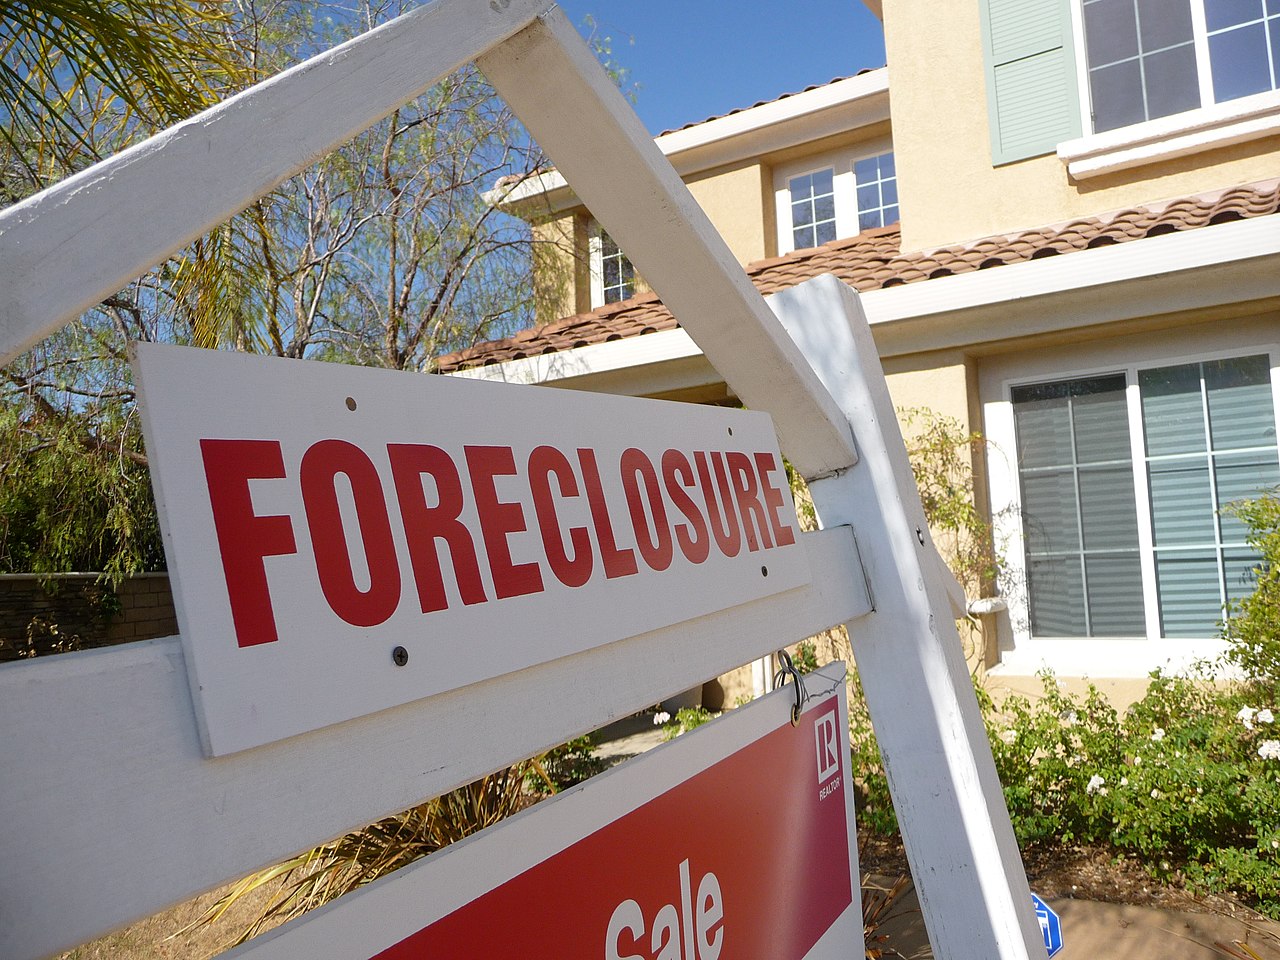 Image: US home foreclosures SURGE as inflation continues to soar and incomes decline